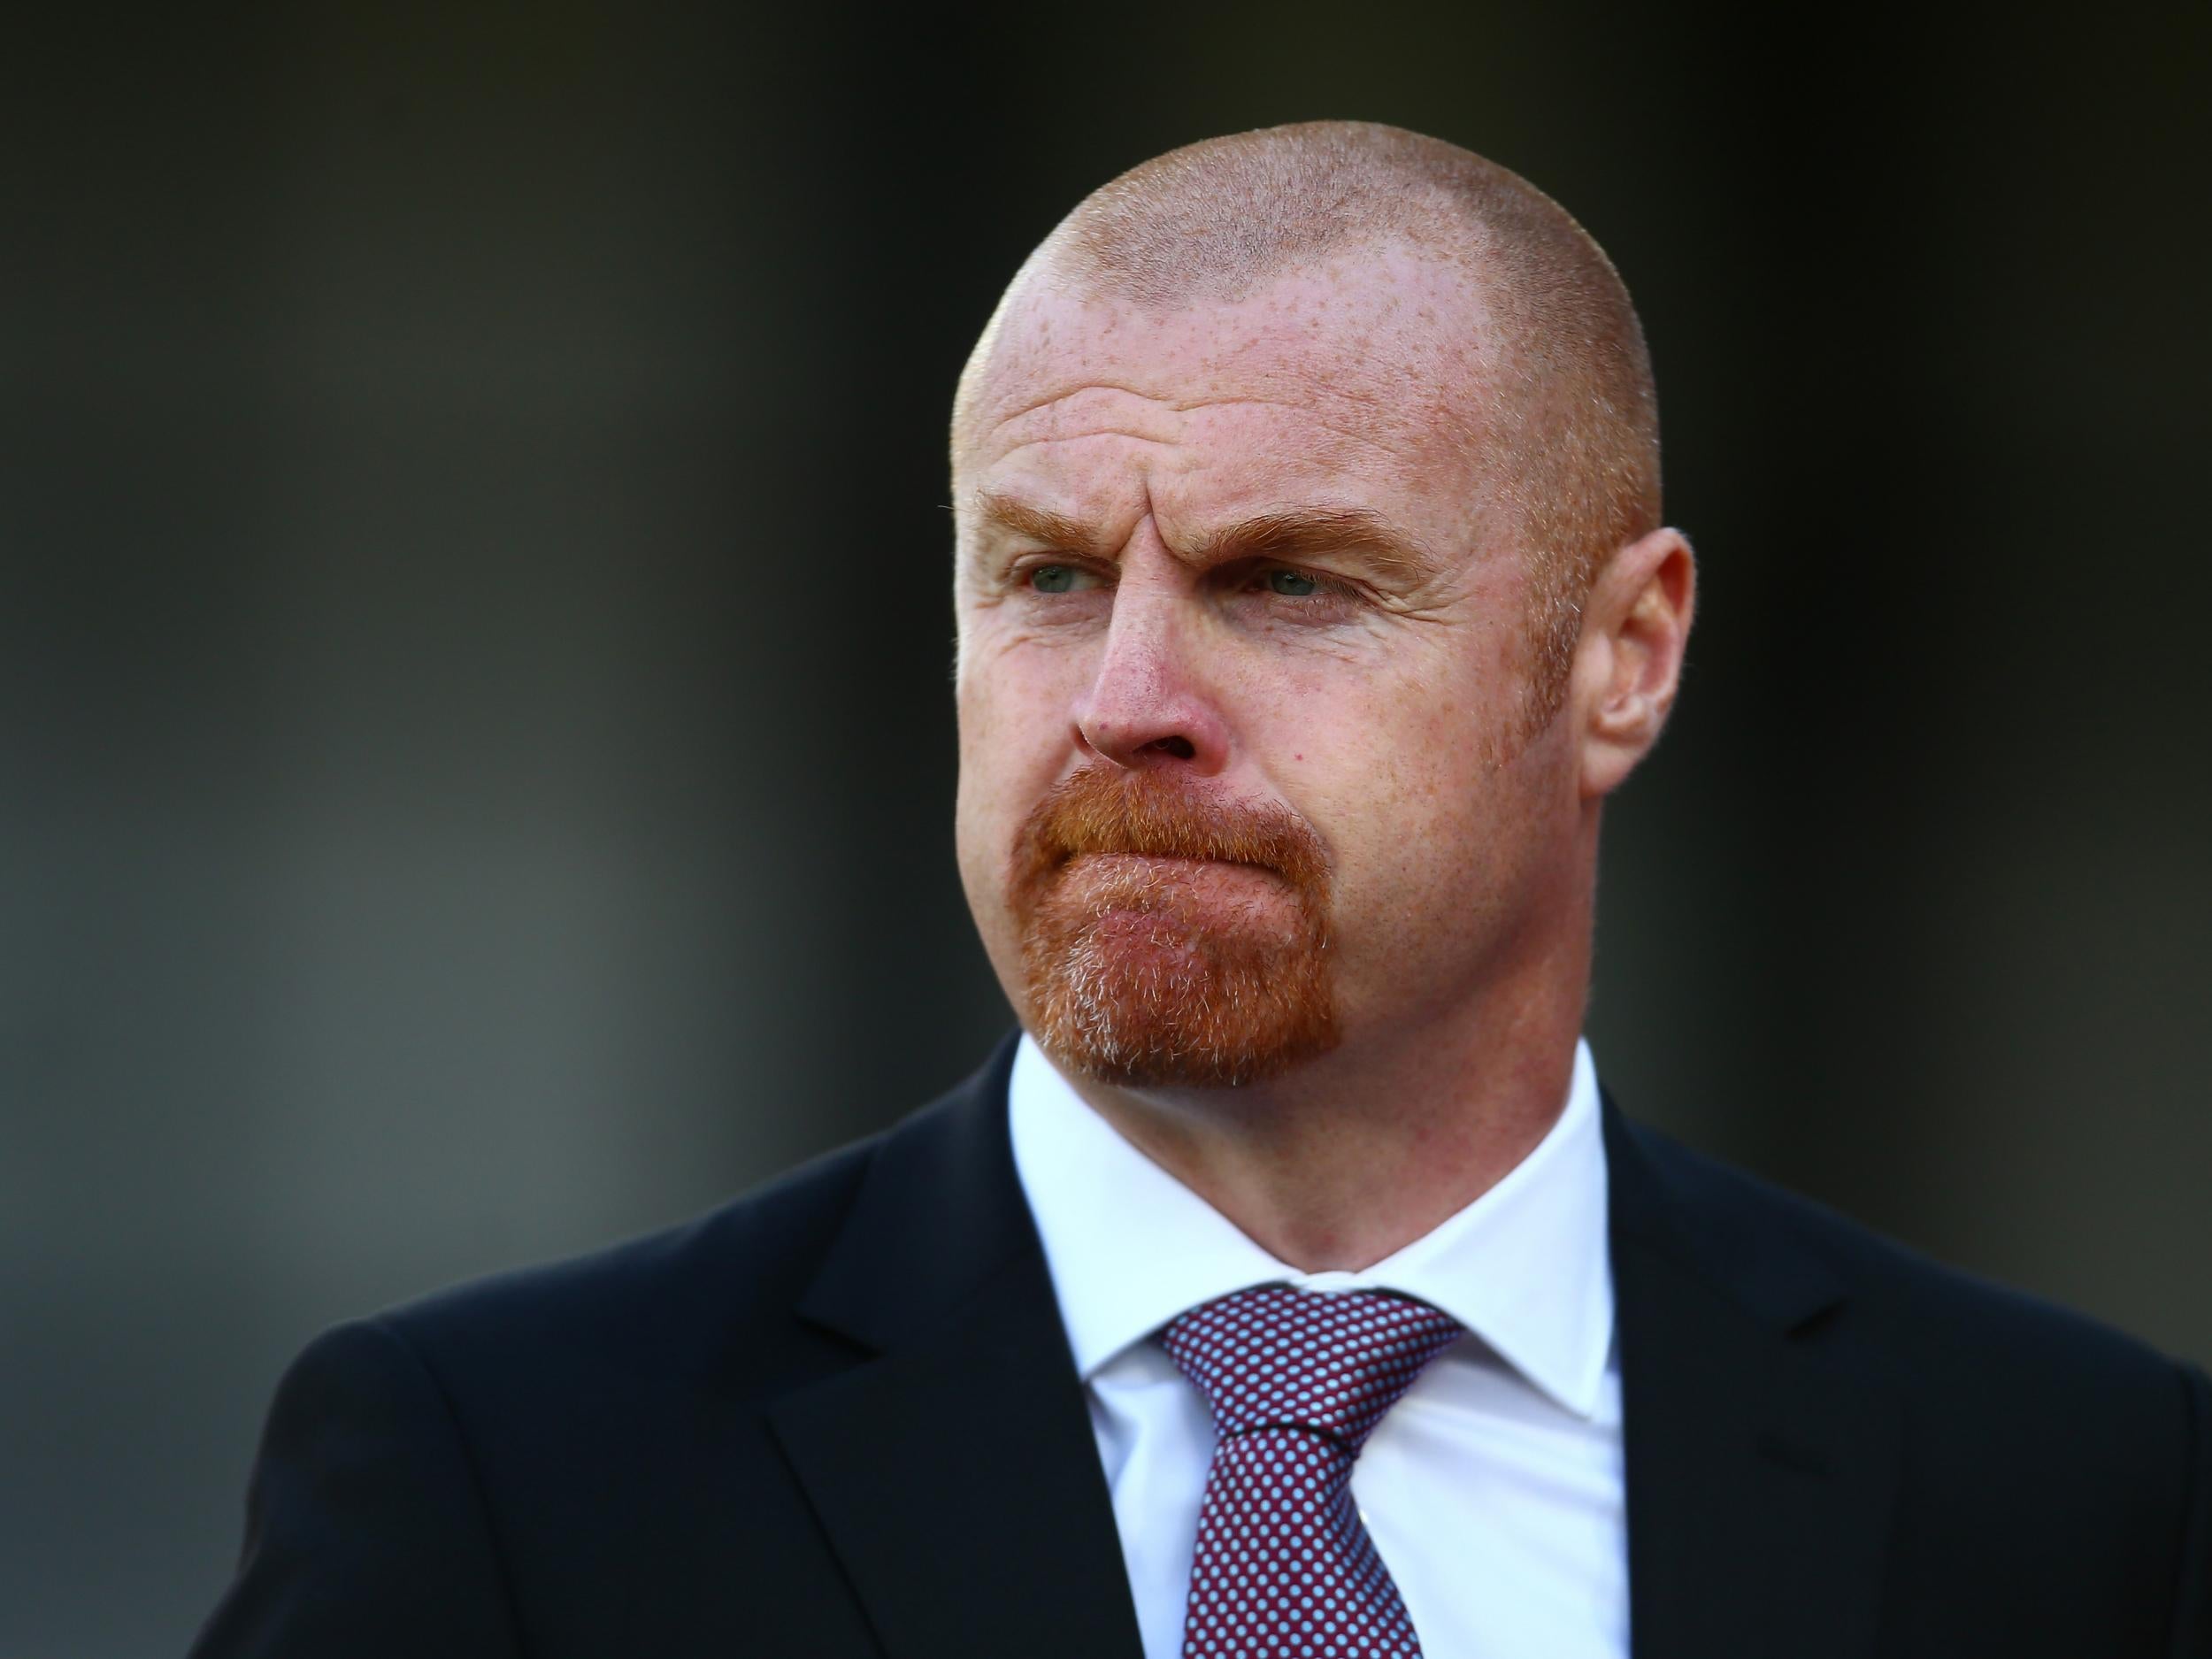 The Clarets will be hoping to improve on last season's 16th place finish - but can they keep hold of manager Sean Dyche?